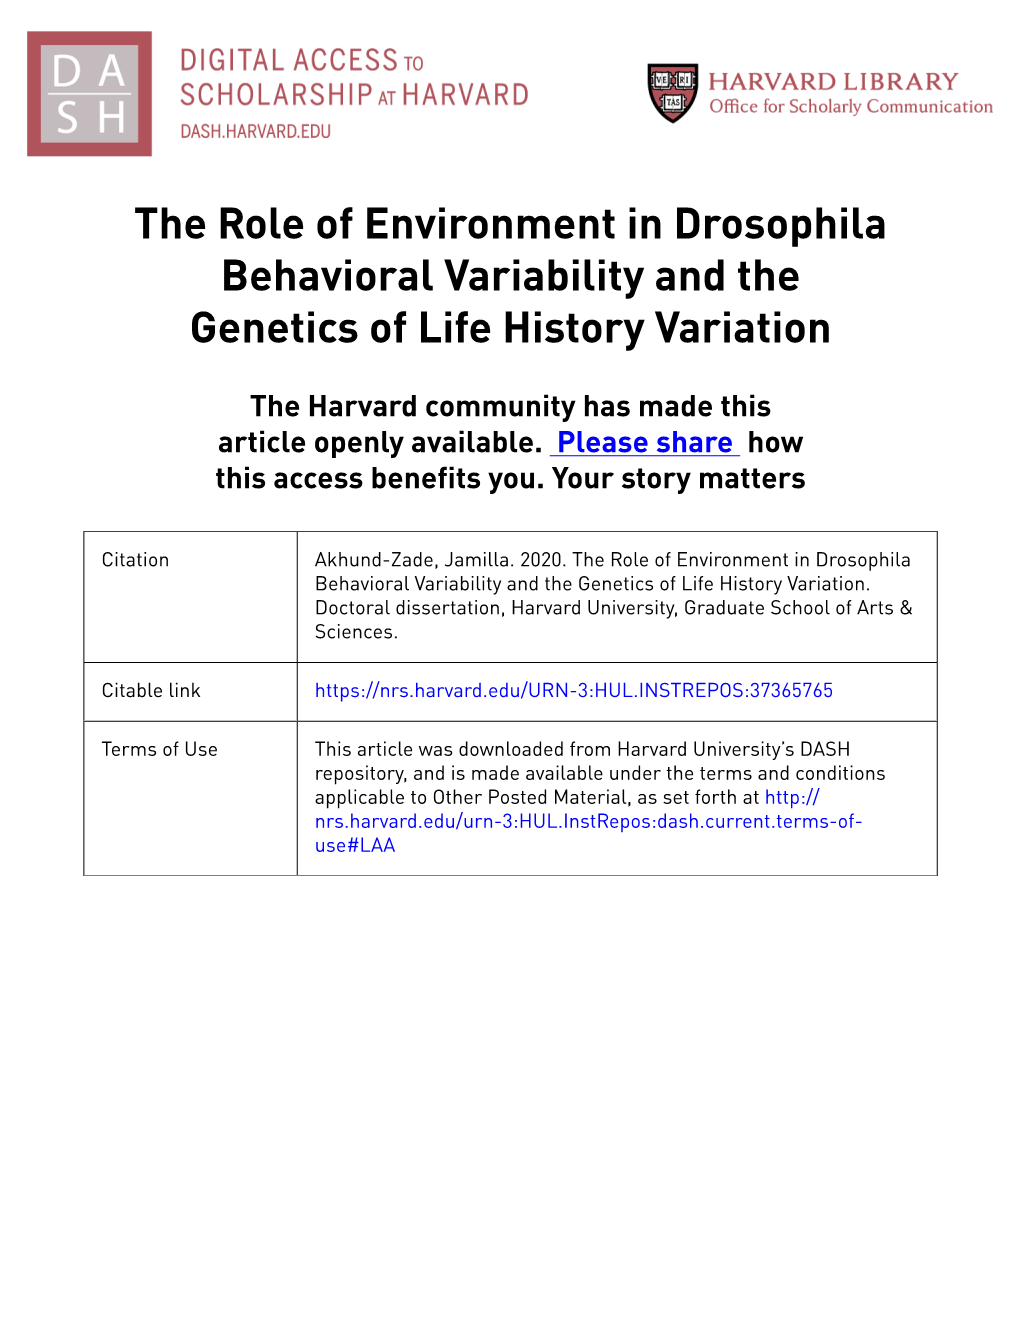 The Role of Environment in Drosophila Behavioral Variability and the Genetics of Life History Variation